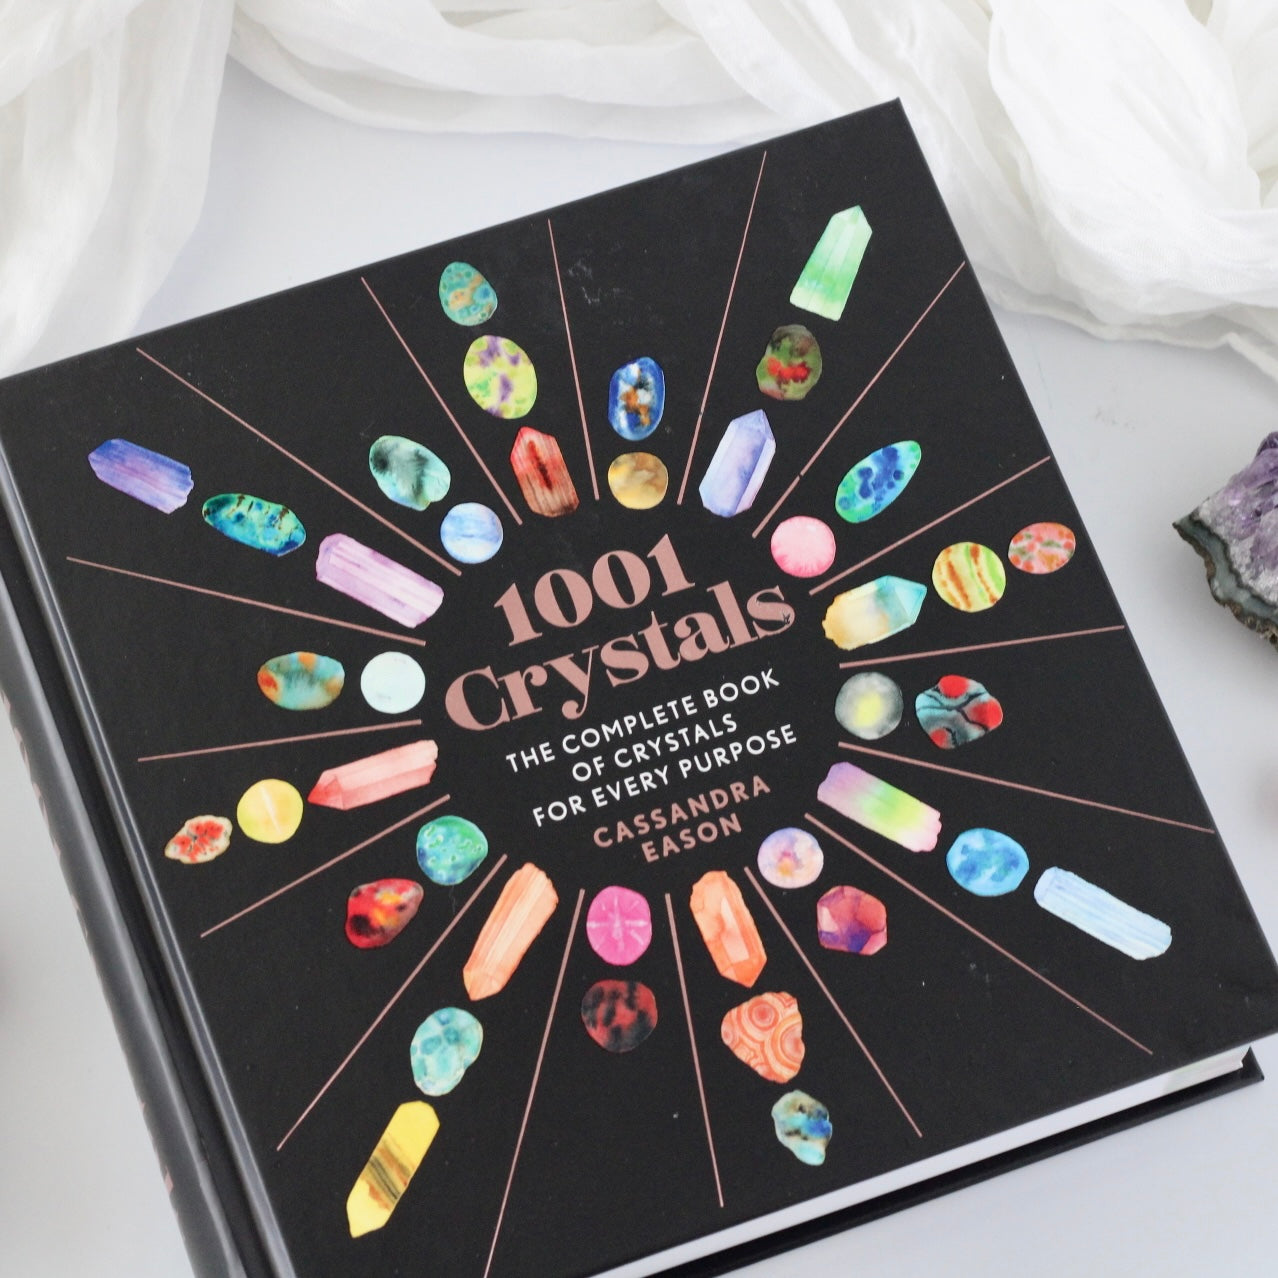 1001 Crystals: The Complete Book of Crystals For Every Purpose By Cassandra Eason